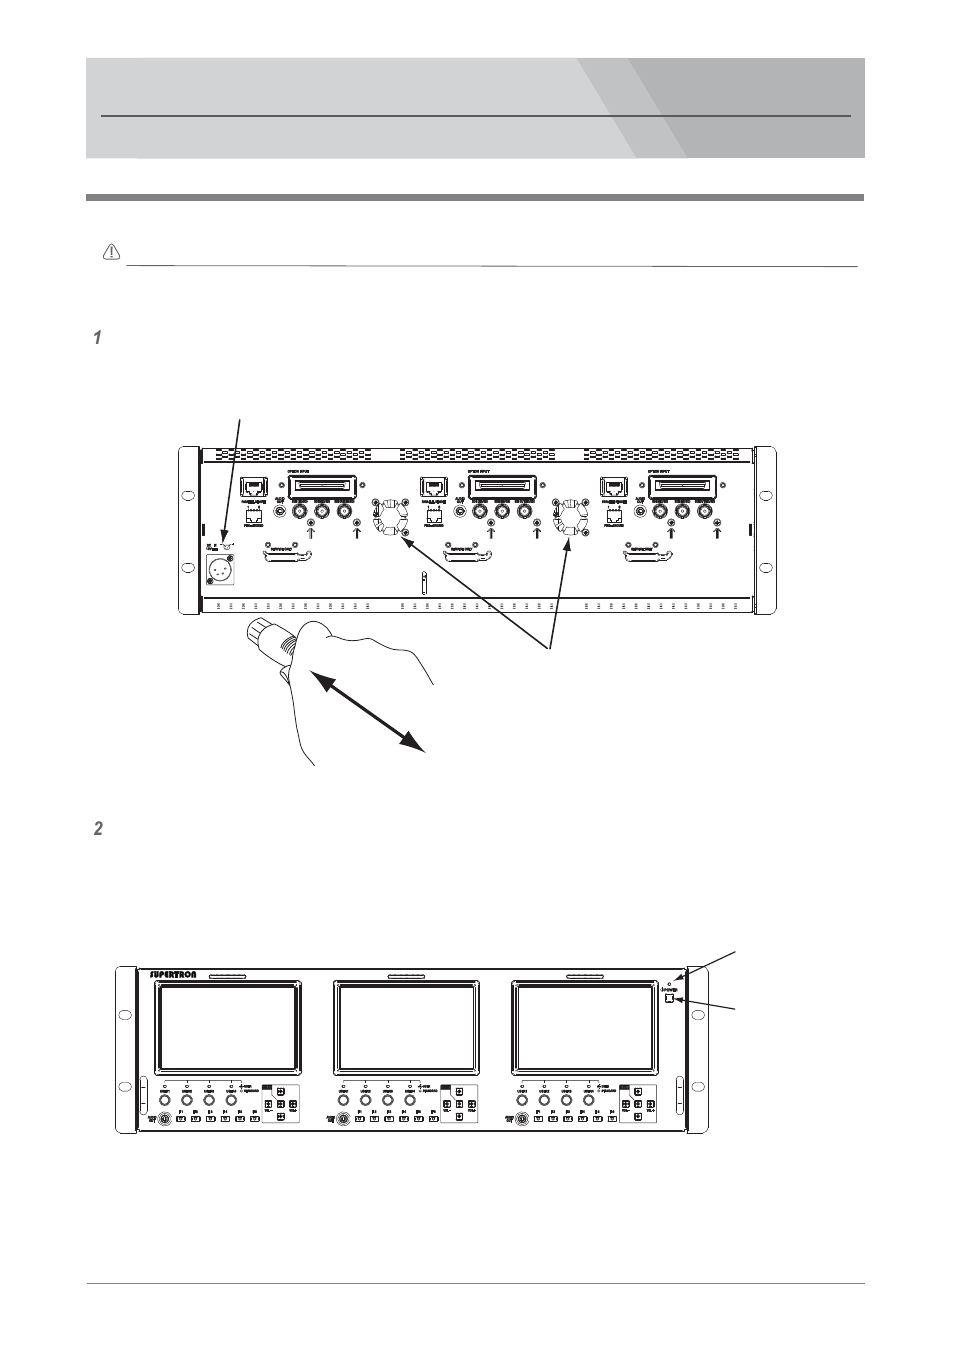 Connection | Nipros HDM-3000 User Manual | Page 17 / 37